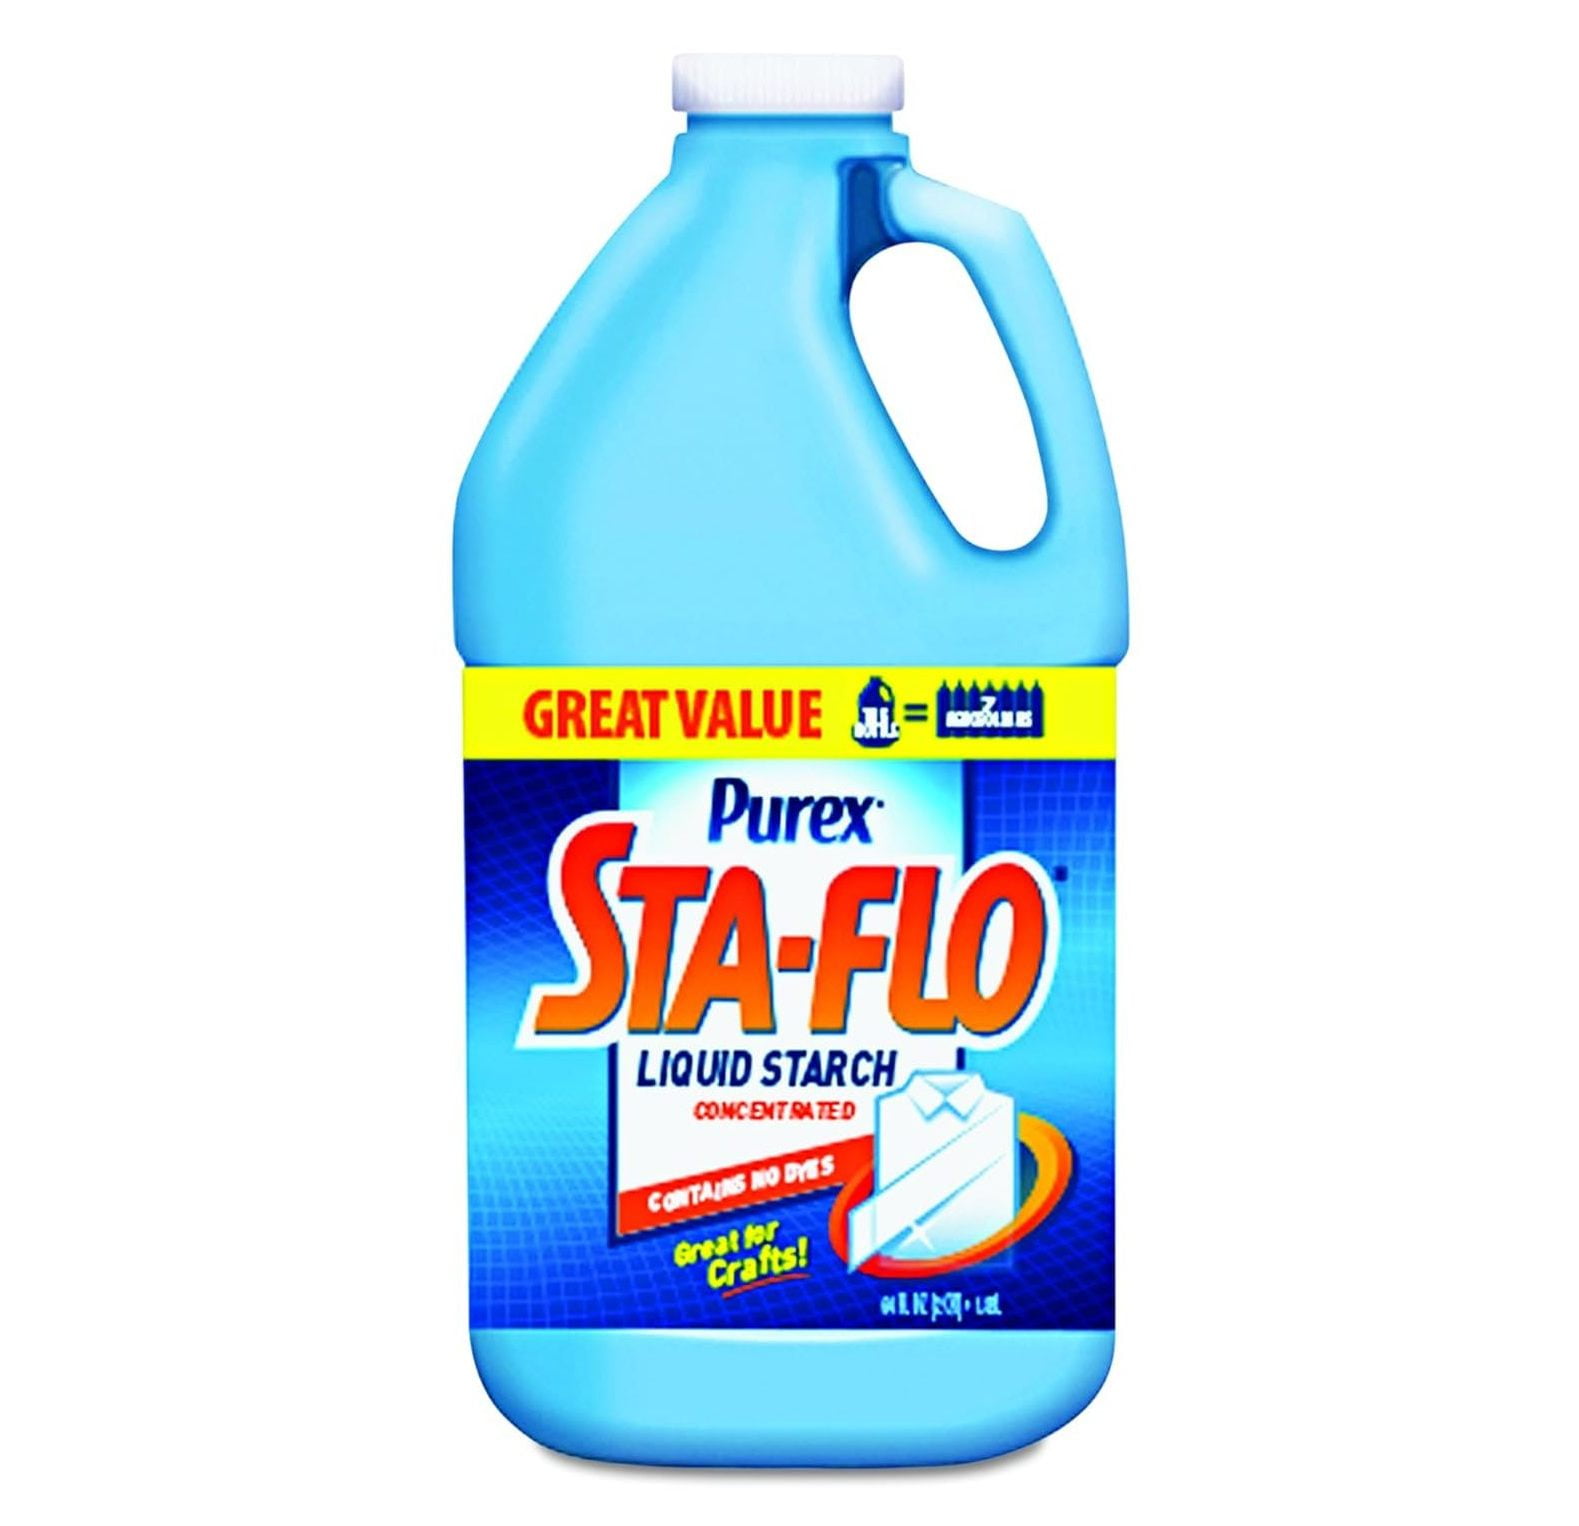 Purex Sta Flo Liquid Starch, Great for Crafts, Concentrated, 64 Ounce 